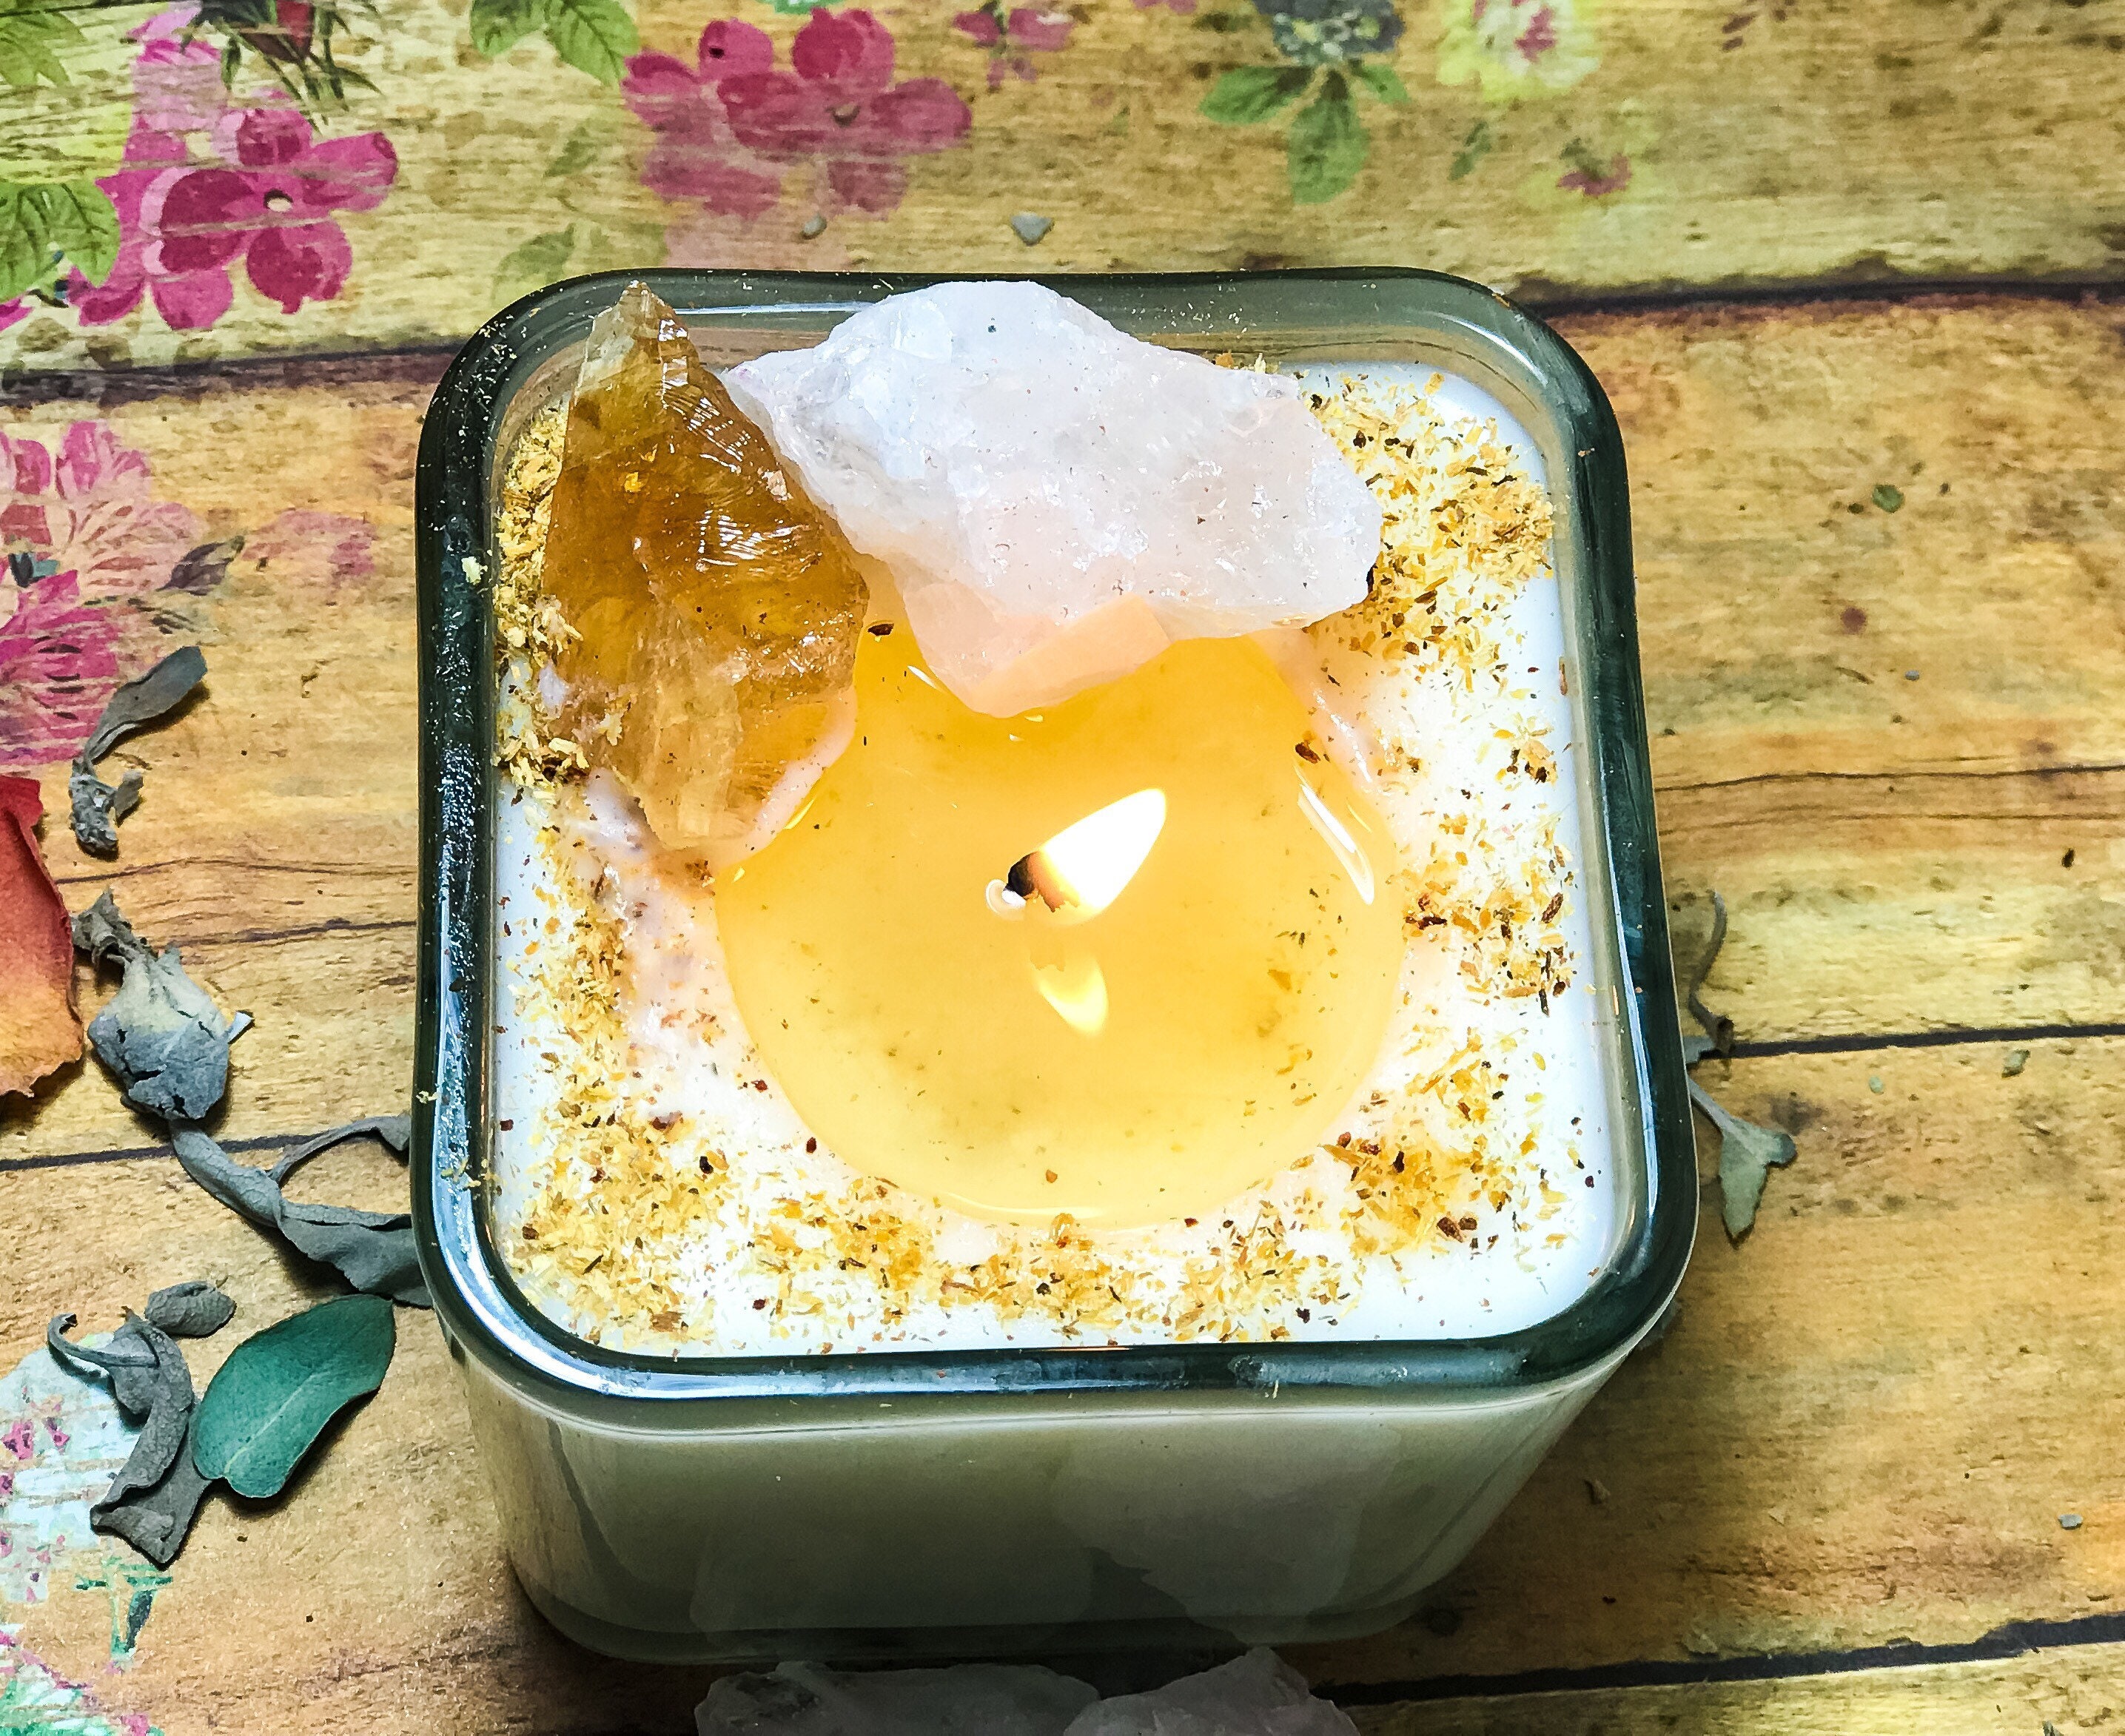 Prosperity Candle 100 Soy Wax Essential Oil Blend